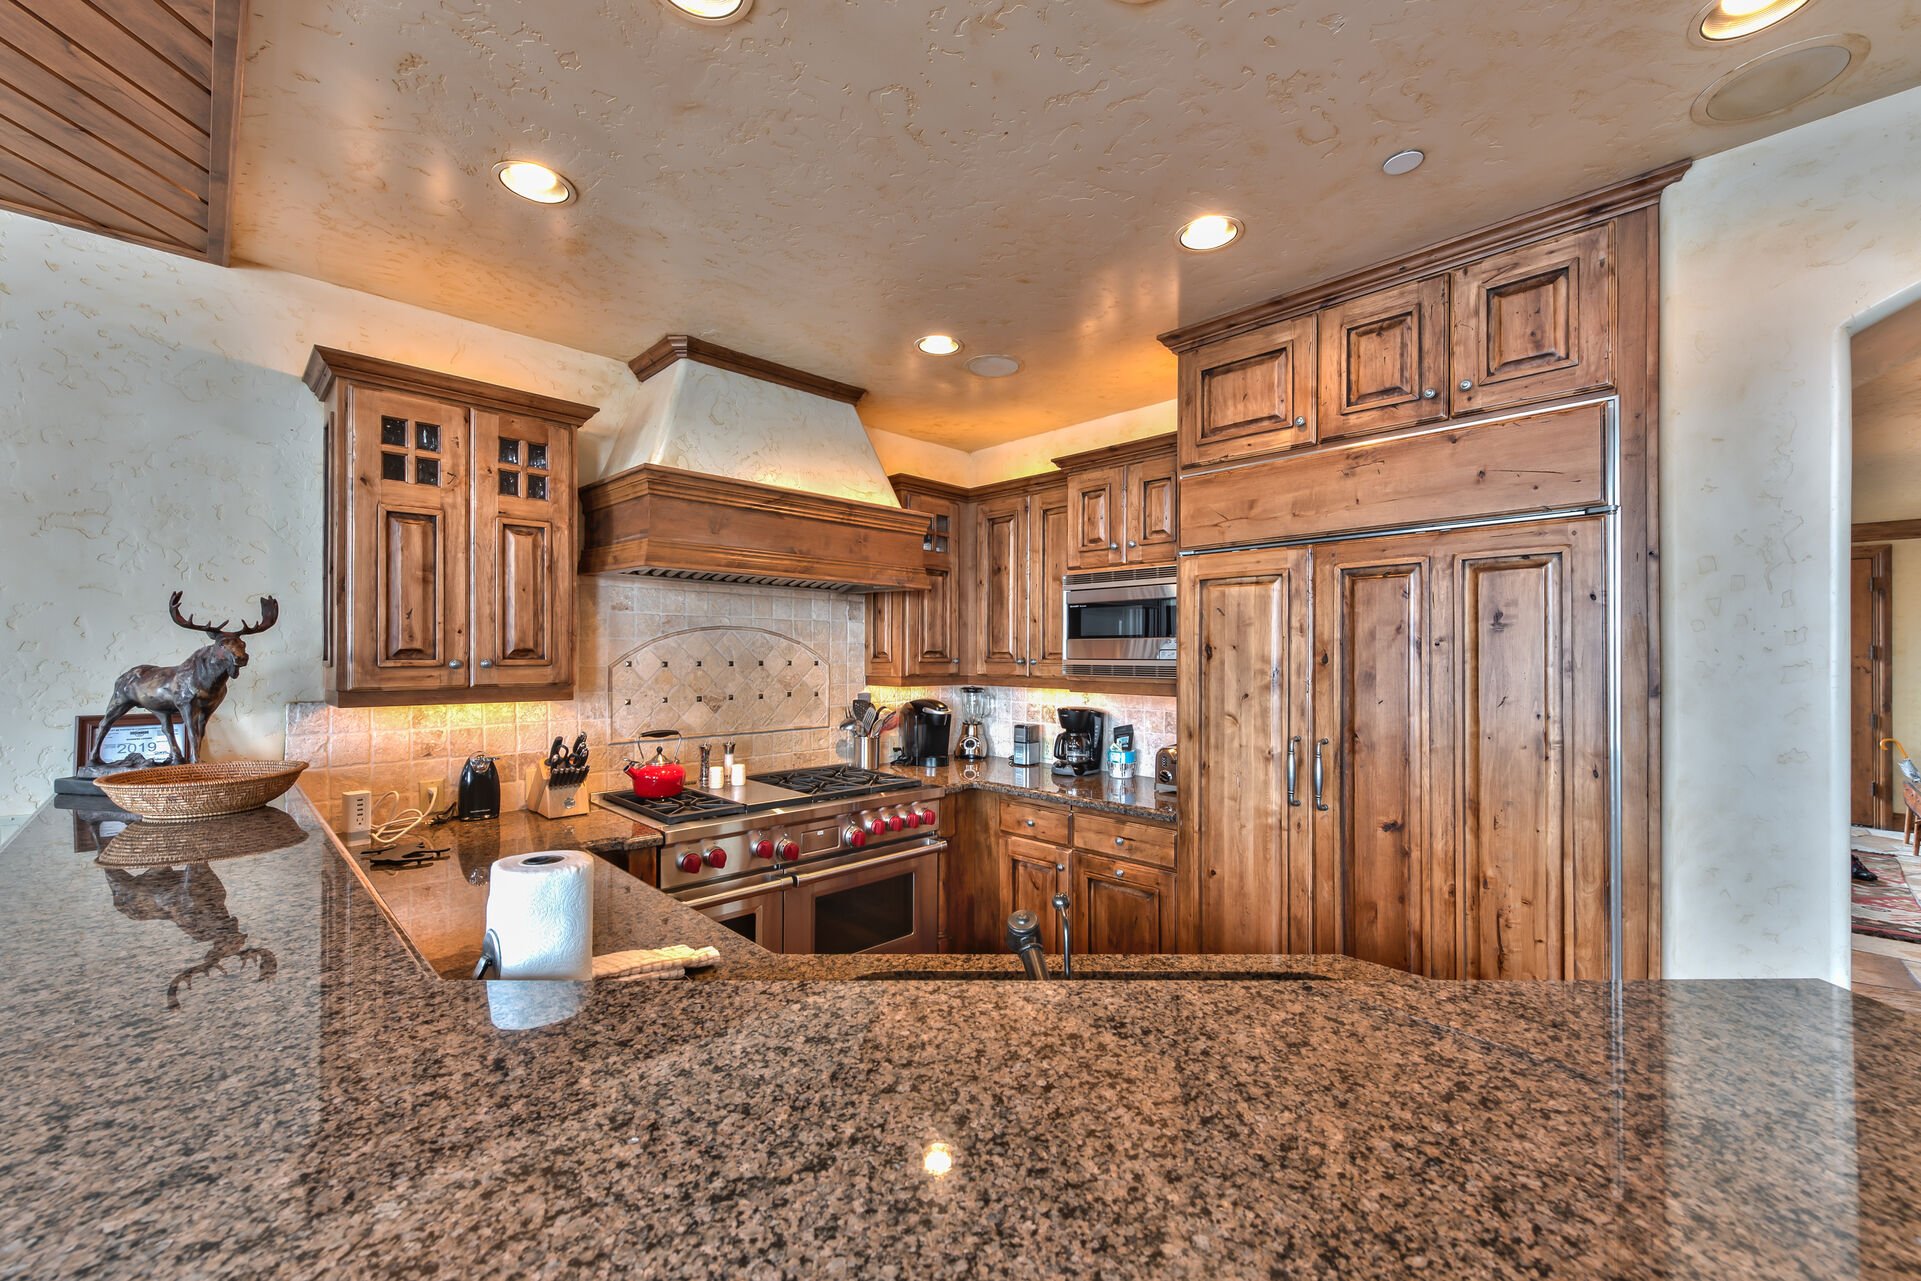 Chefs Kitchen with Stunning Cabinetry and Plenty of Counter Space for Meal Prep and Entertaining